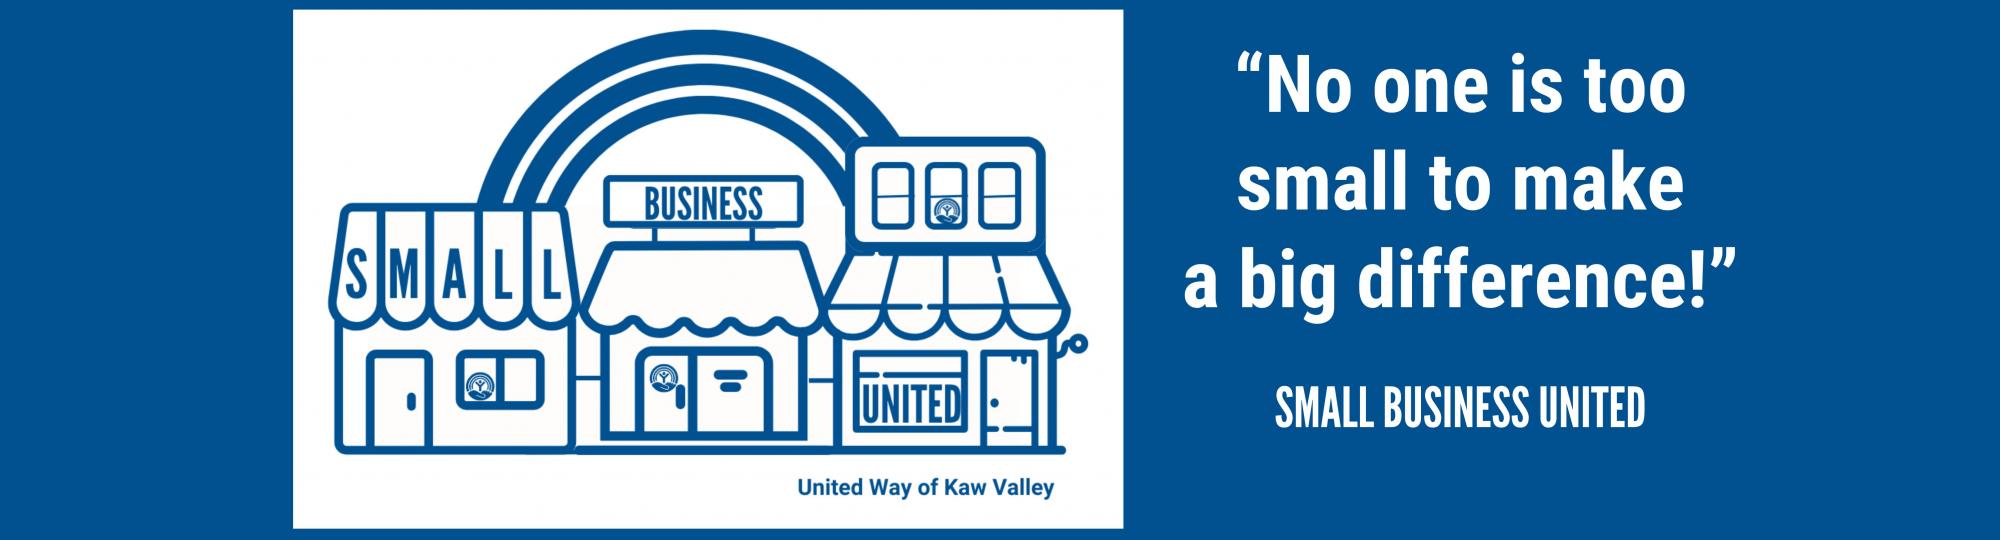 No one is too small to make a big difference--Small Business United